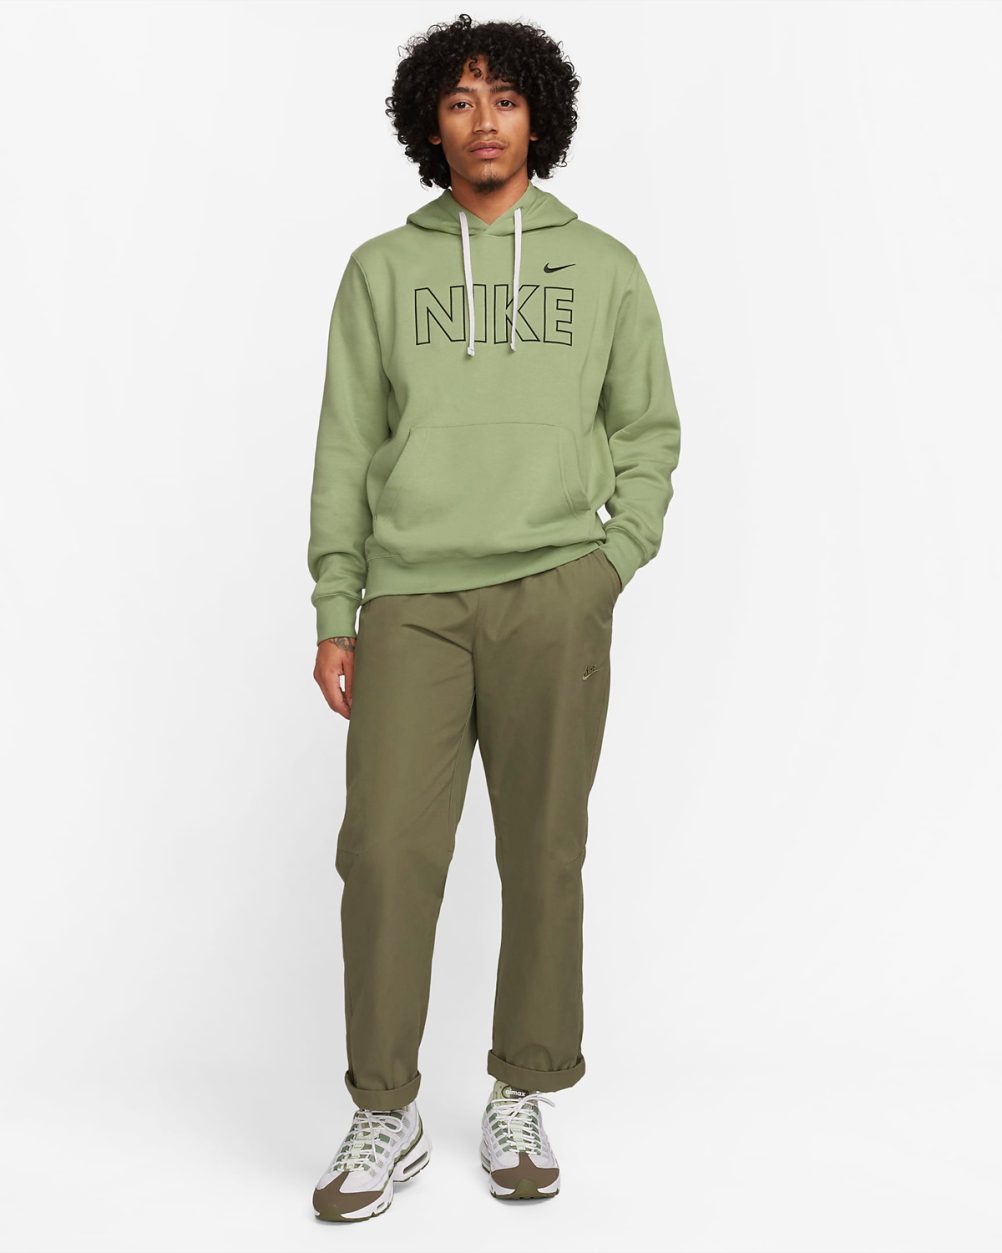 Nike Oil Green Clothing Sneaker Outfits